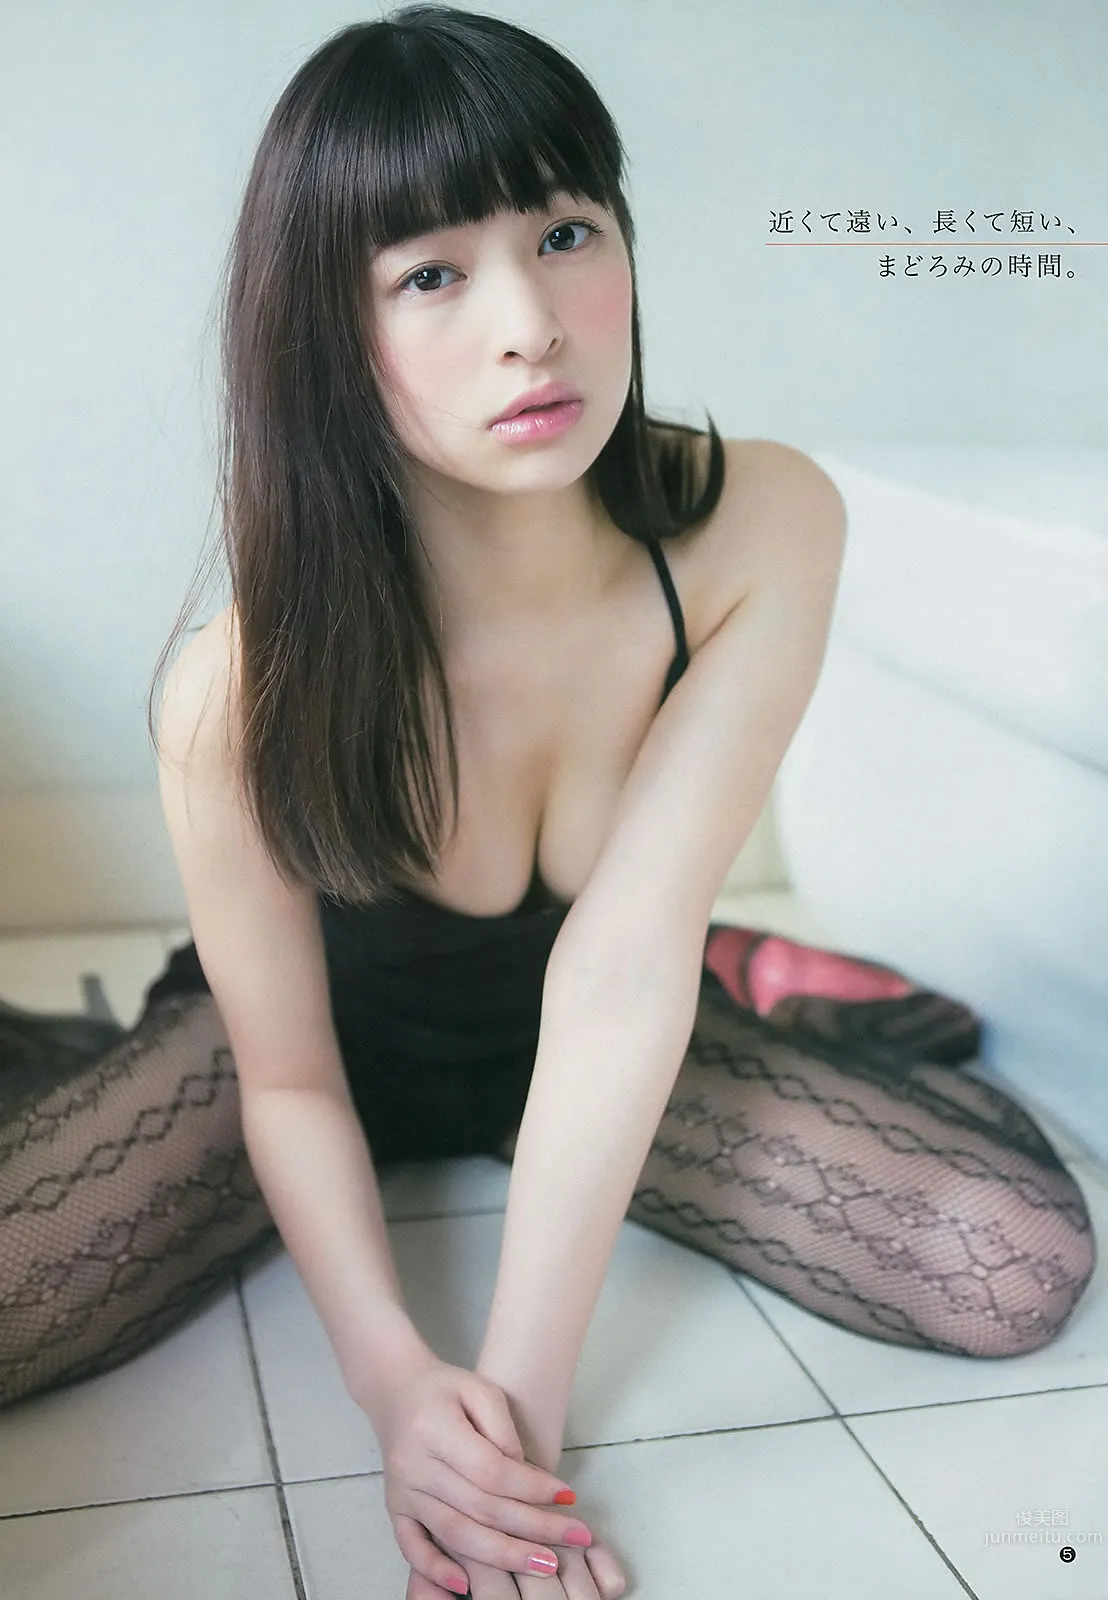 [Weekly Young Jump] 2013 No.18 19 日南响子 中村静香 モーニング娘。 西内まりや [28P]_9